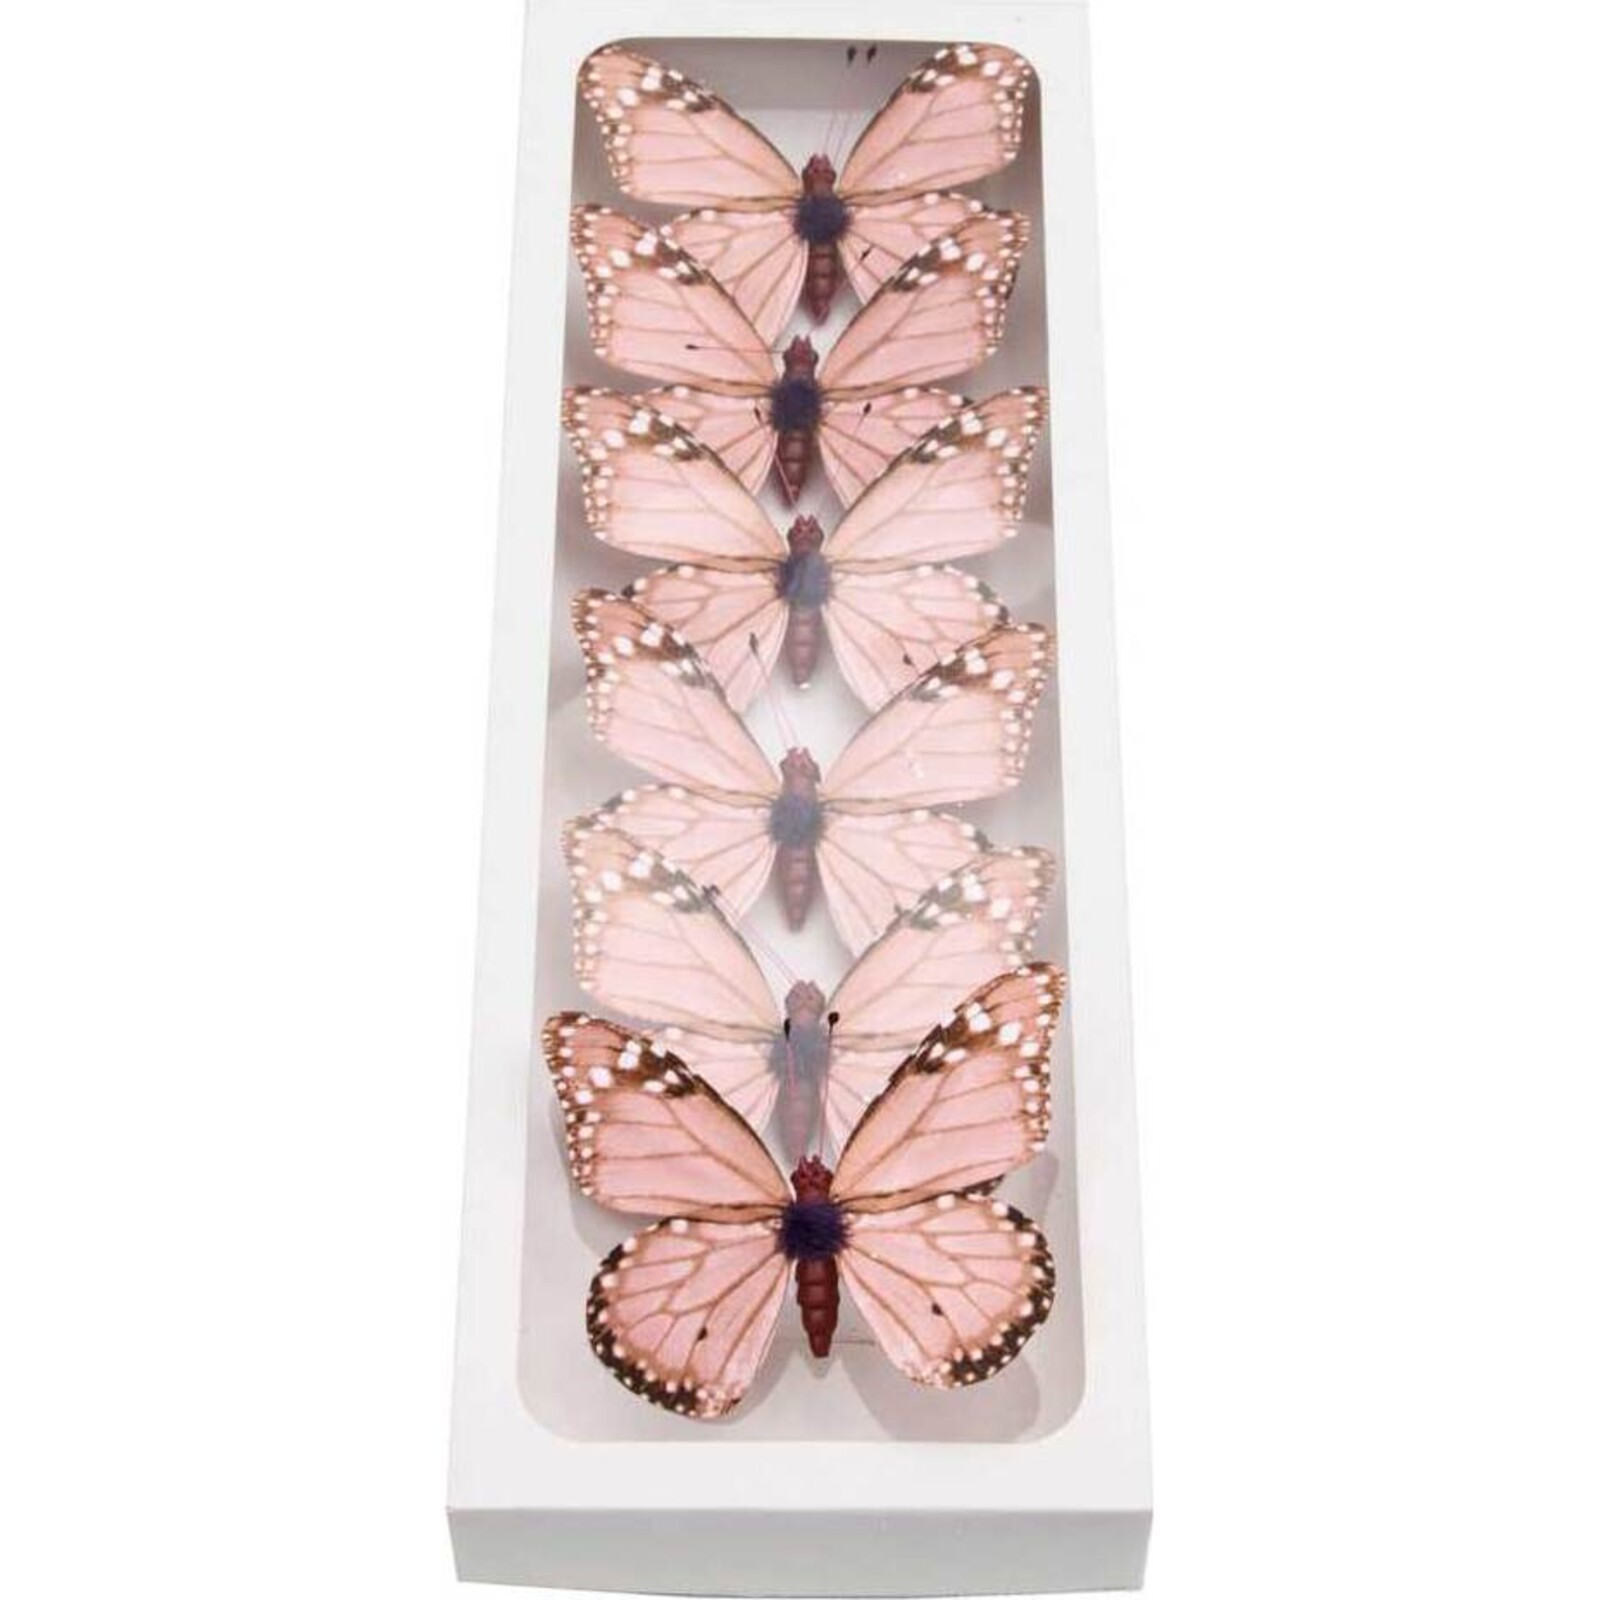  Butterfly Small - Pink White Dot  set 6